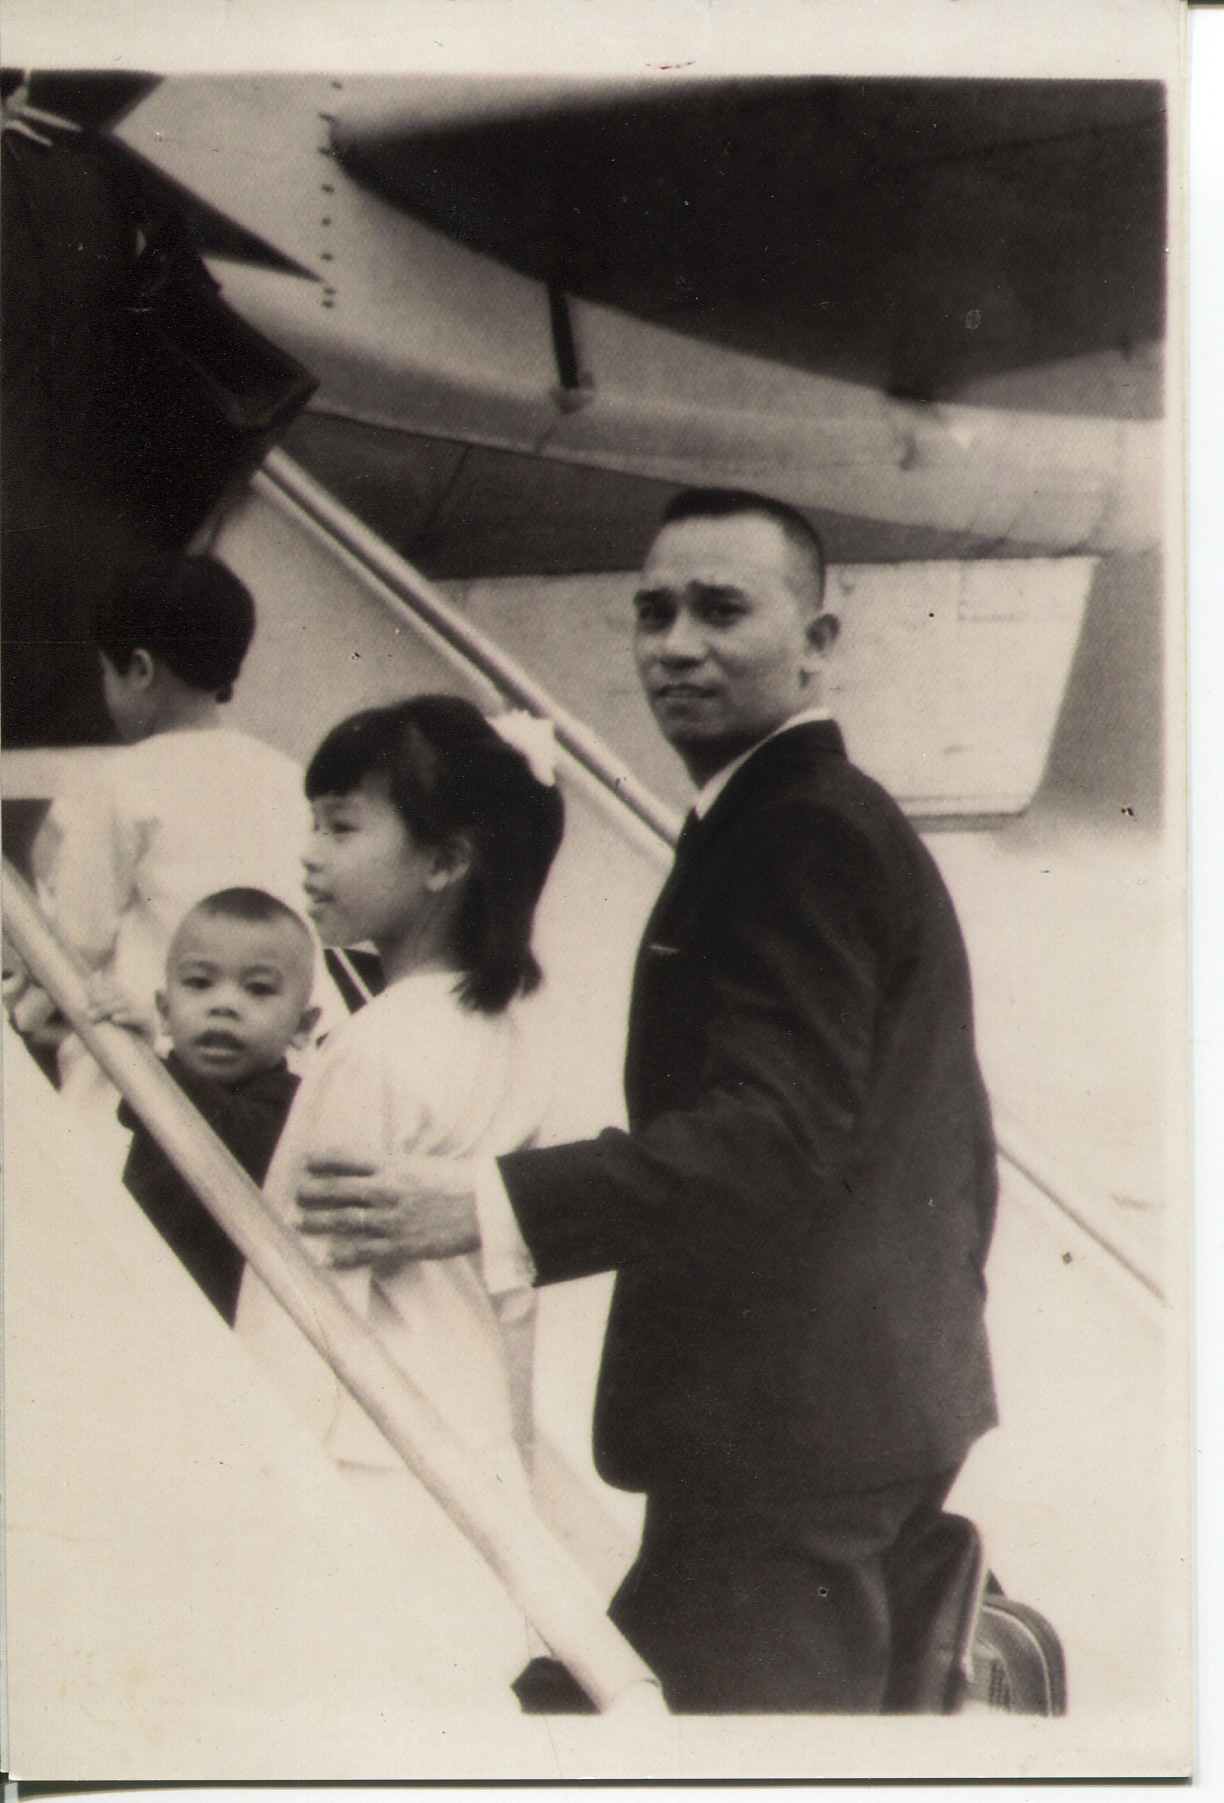 Photo of Arguelles and family, 1969. This is a newer copy (one of many) which Arguelles acquired in 2008 from an aunt. The photo was taken at the Manila airport and Arguelles said it could be a TWA airplane to Canada. Left to right: back of mother (Magdalena- holding Gene [brother] not pictured), Magdalena(self), Lester (brother), Althea (sister), Jose (father). Written on the back is: “MIA June 16, 1969 They go afar off with the faith of Abram but shall come back with the thoughts and feelings of Jacob. -P Molina. He looked back to explain his sad thoughts. “To Morit andToting”Arguelles said the photo was important because it represents a total break from the country she had known until age 6. She said leaving broke her whole idea of the world and that she understood the world was bigger. Arguelles had to be tutored in English and got new clothes.For her parents (dad was 40), Arguelles said there were far better economic opportunities. Both parents had siblings who were nurses in Canada. Arguelles’ parent’s siblings helped them in Canada and it was an exciting time. Arguelles said that excitement wore off,leaving the difficulties and prejudices of a new country. Any views, findings, conclusions, or recommendations expressed in this story do not necessarily represent those of the National Endowment for the Humanities. (c) Field Museum of Natural History - CC BY-NC 4.0